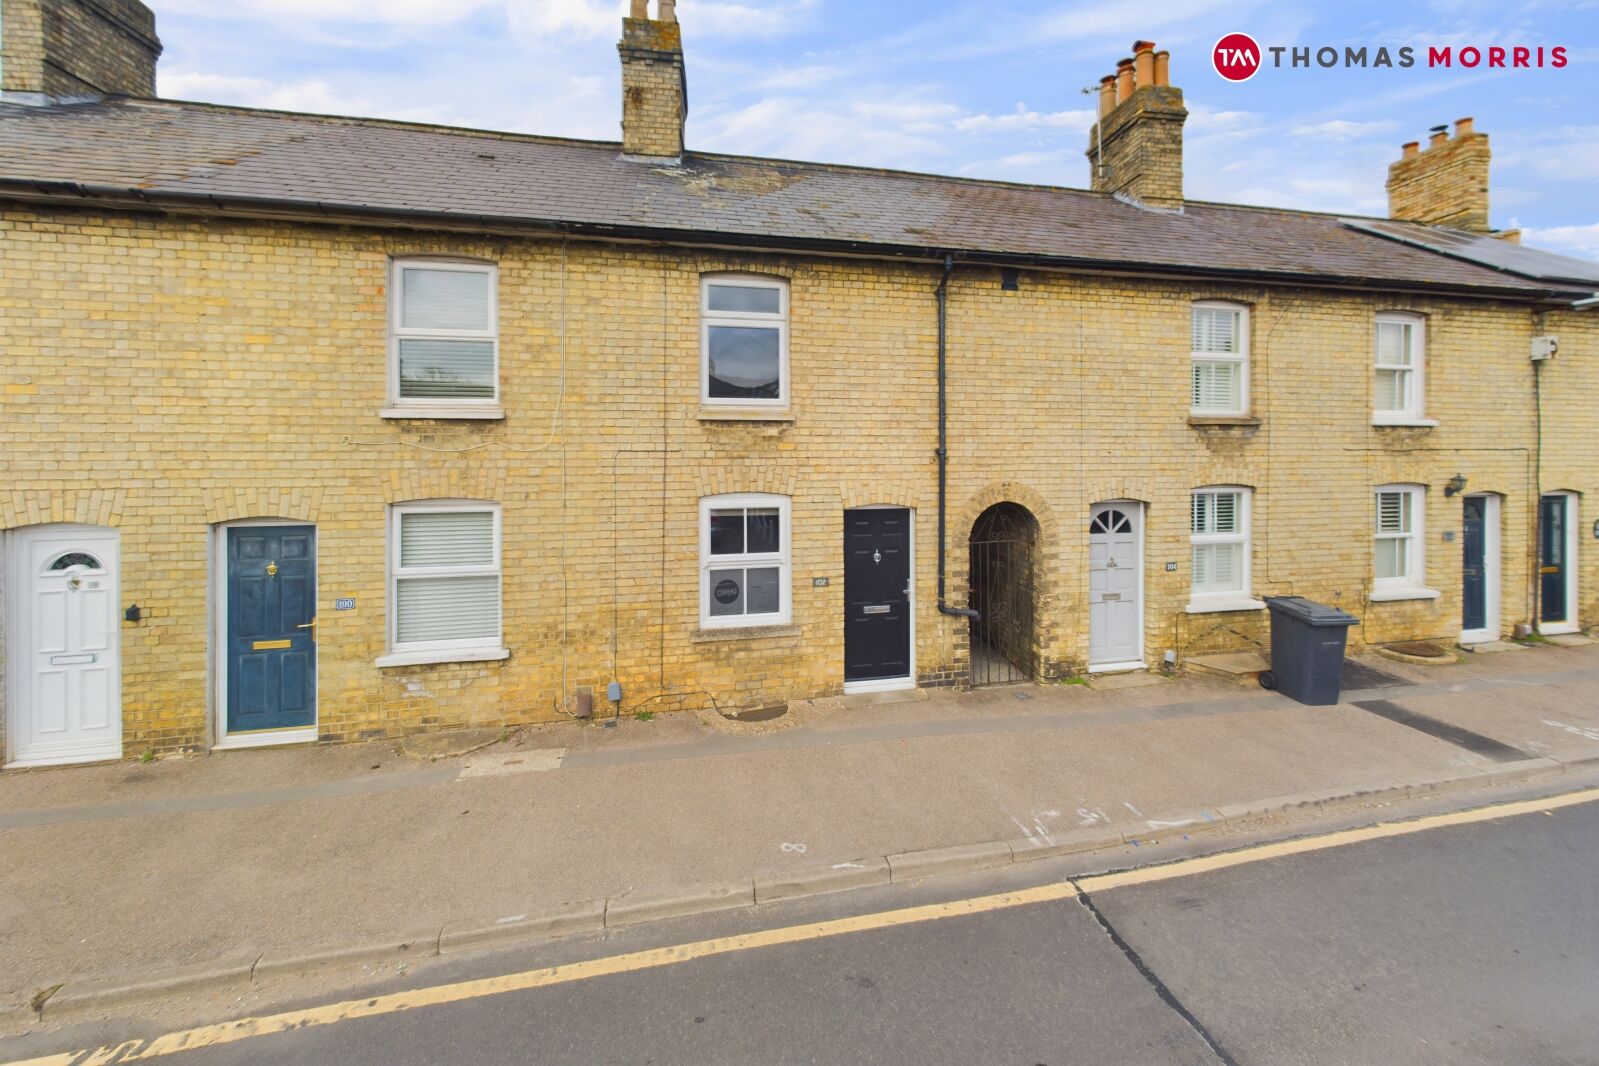 2 bedroom mid terraced house for sale Mill Road, Royston, SG8, main image